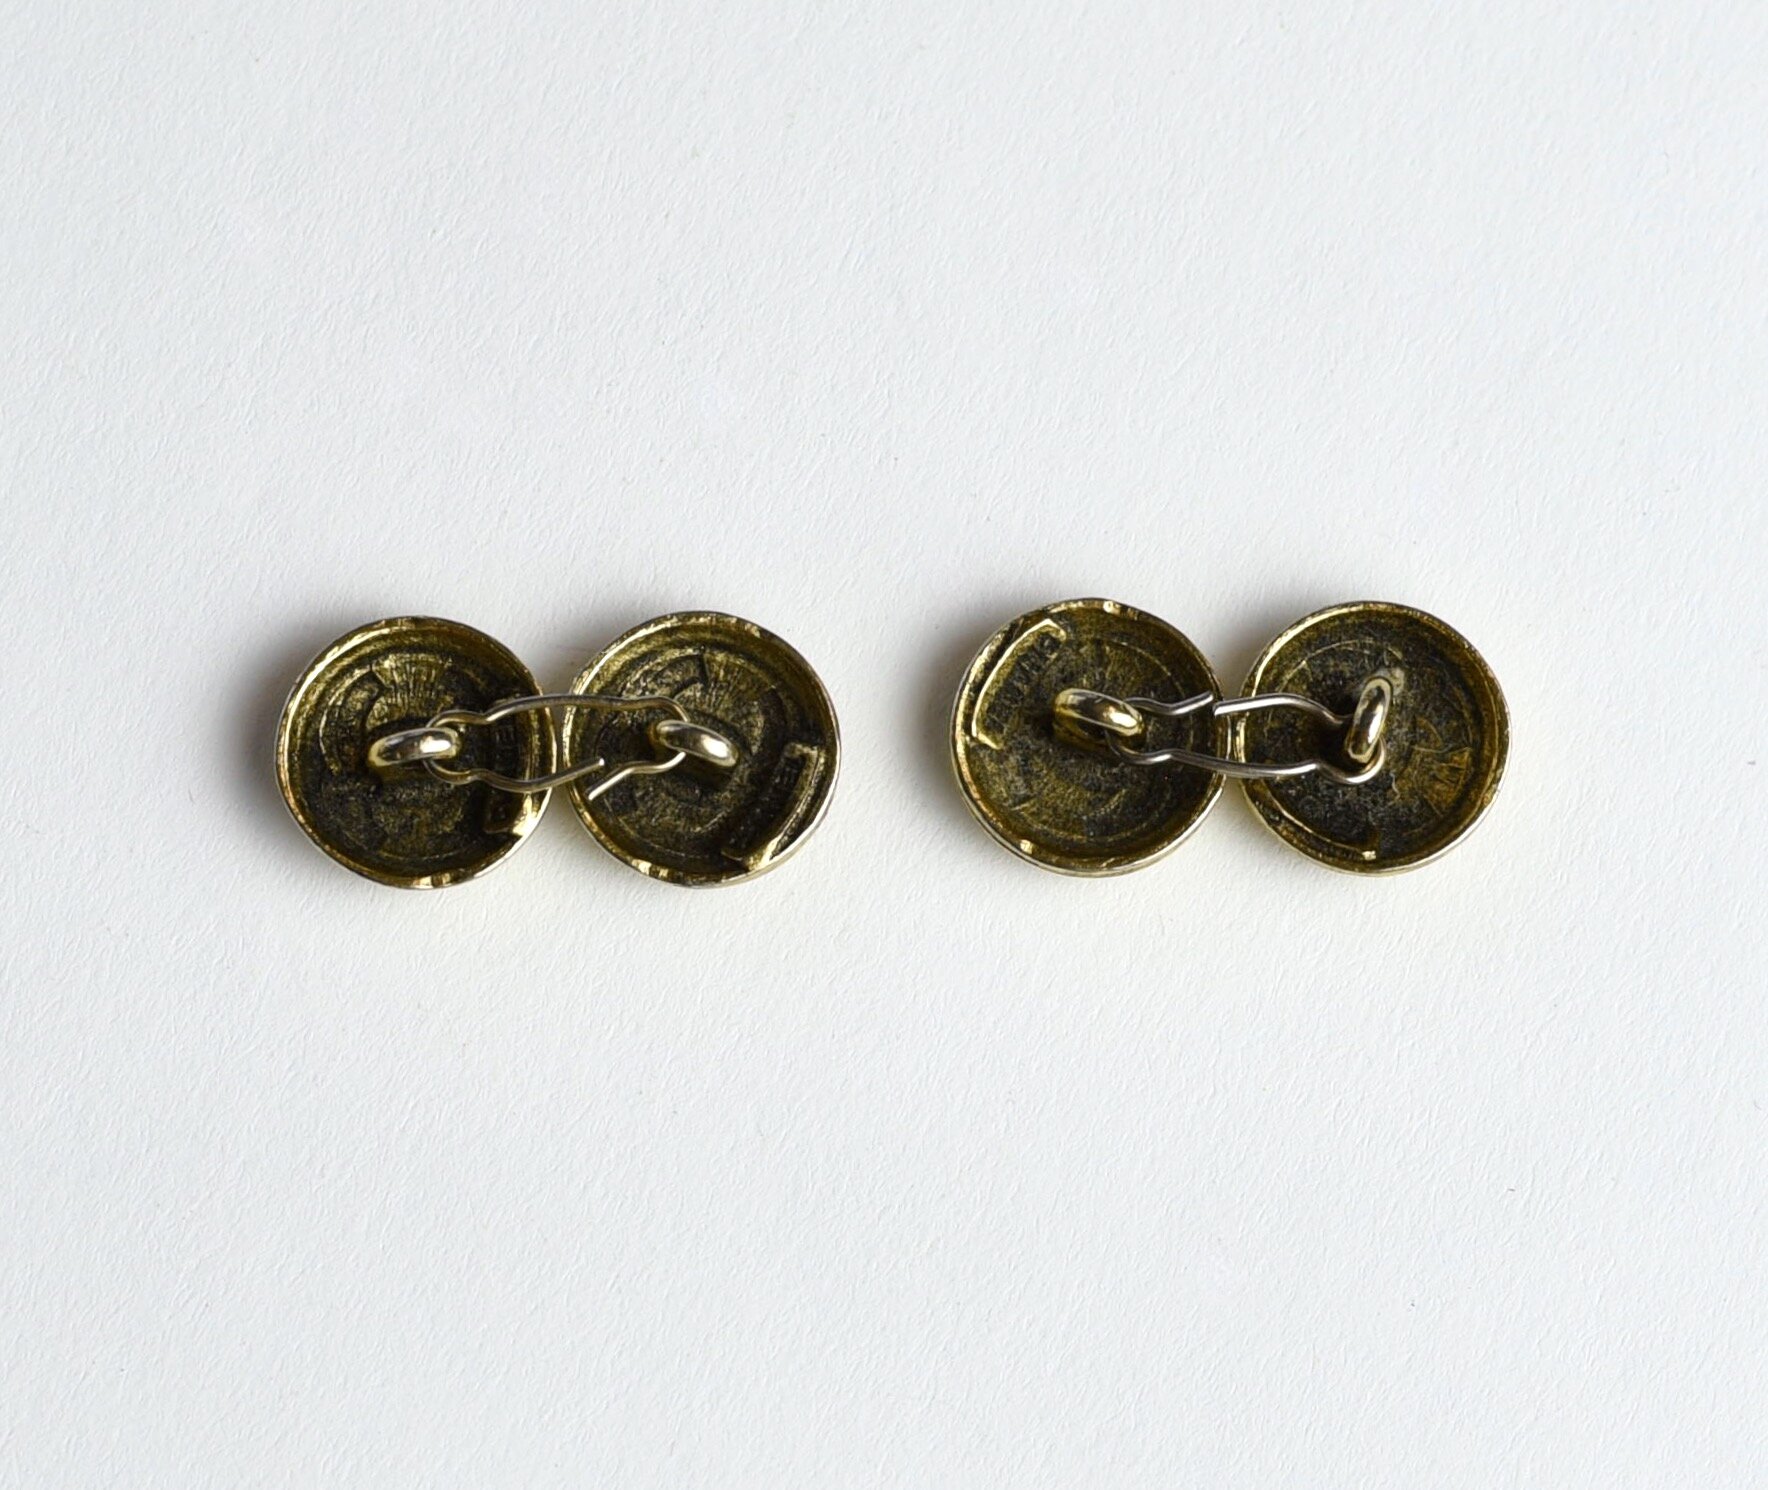 1980s Chanel Cuff Links Signed — Canned Ham Vintage